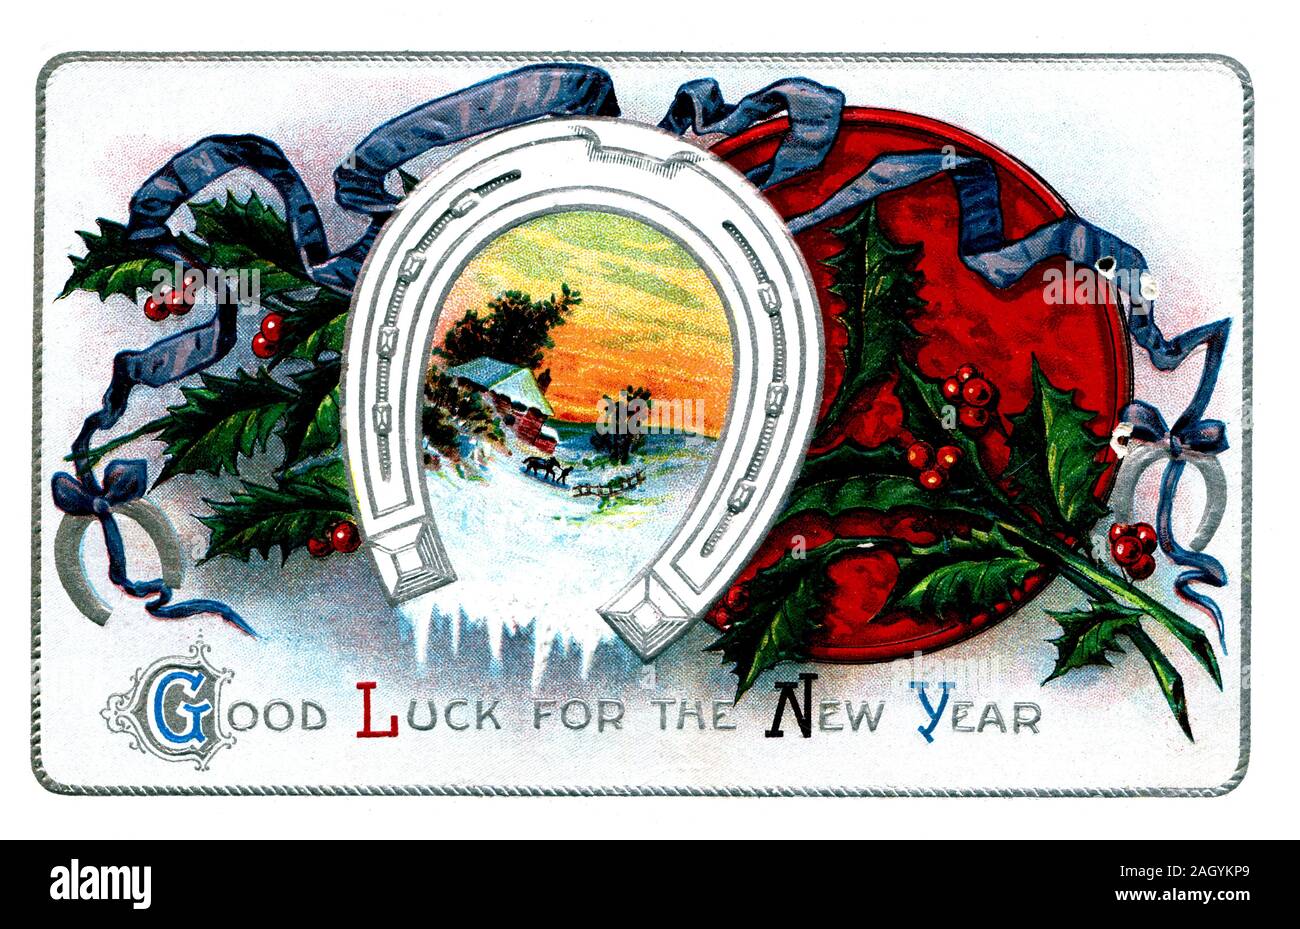 Vintage Postcard, Antique Greeting card, Good Luck for the New Year, horseshoe, ribbons, house in snow scene Stock Photo